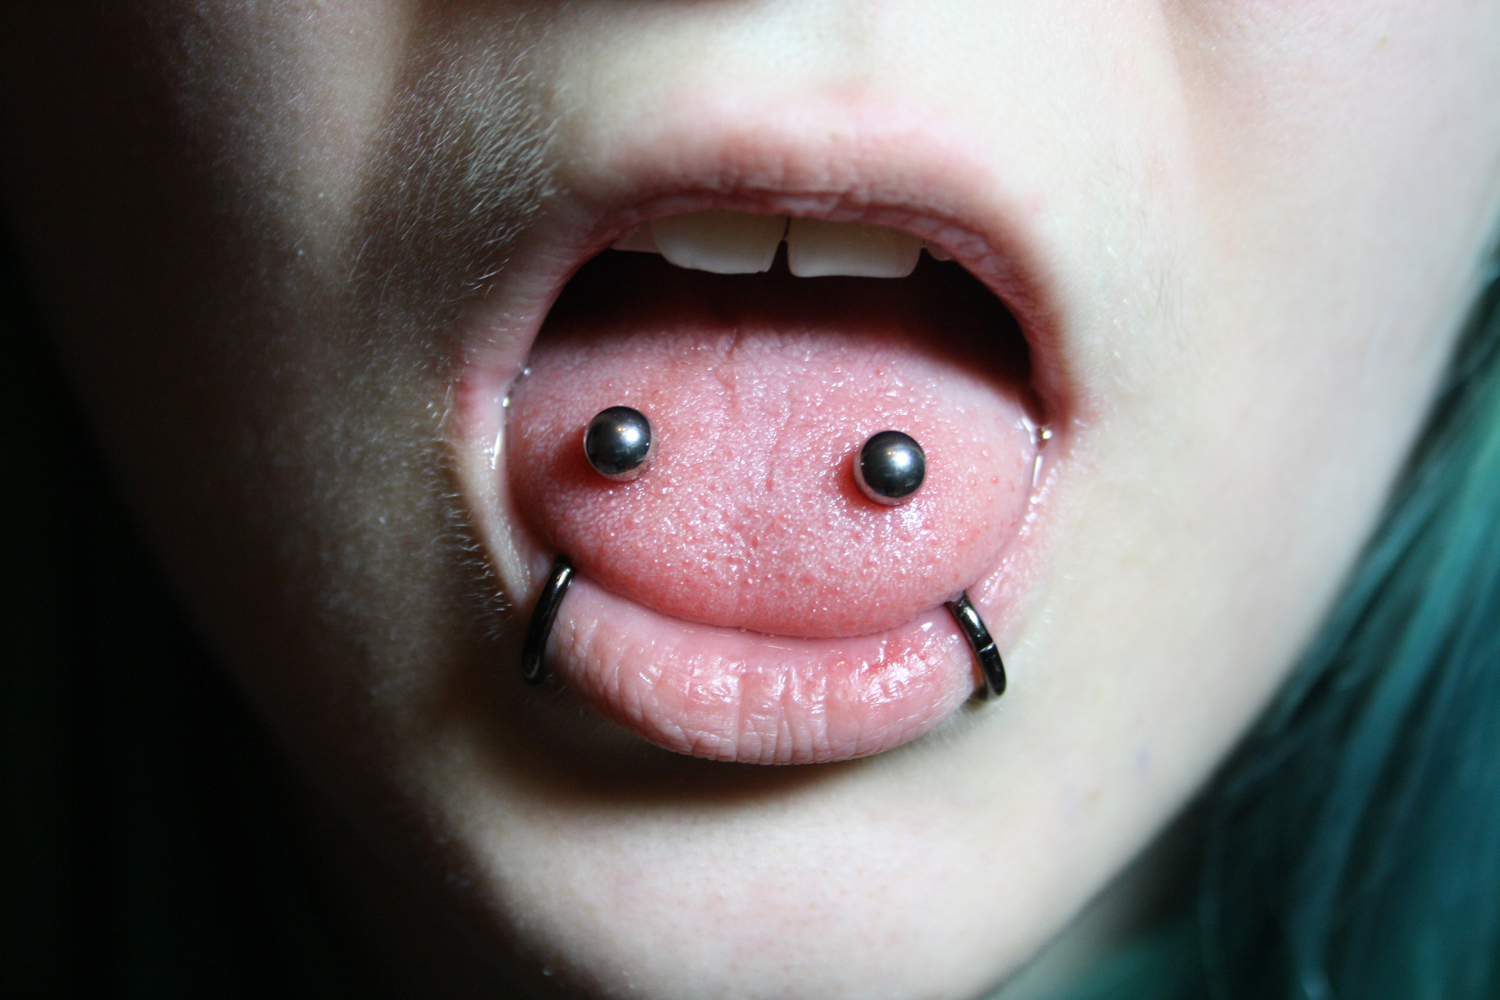 Lower Lips Piercing And Venom Piercing With Silver Studs